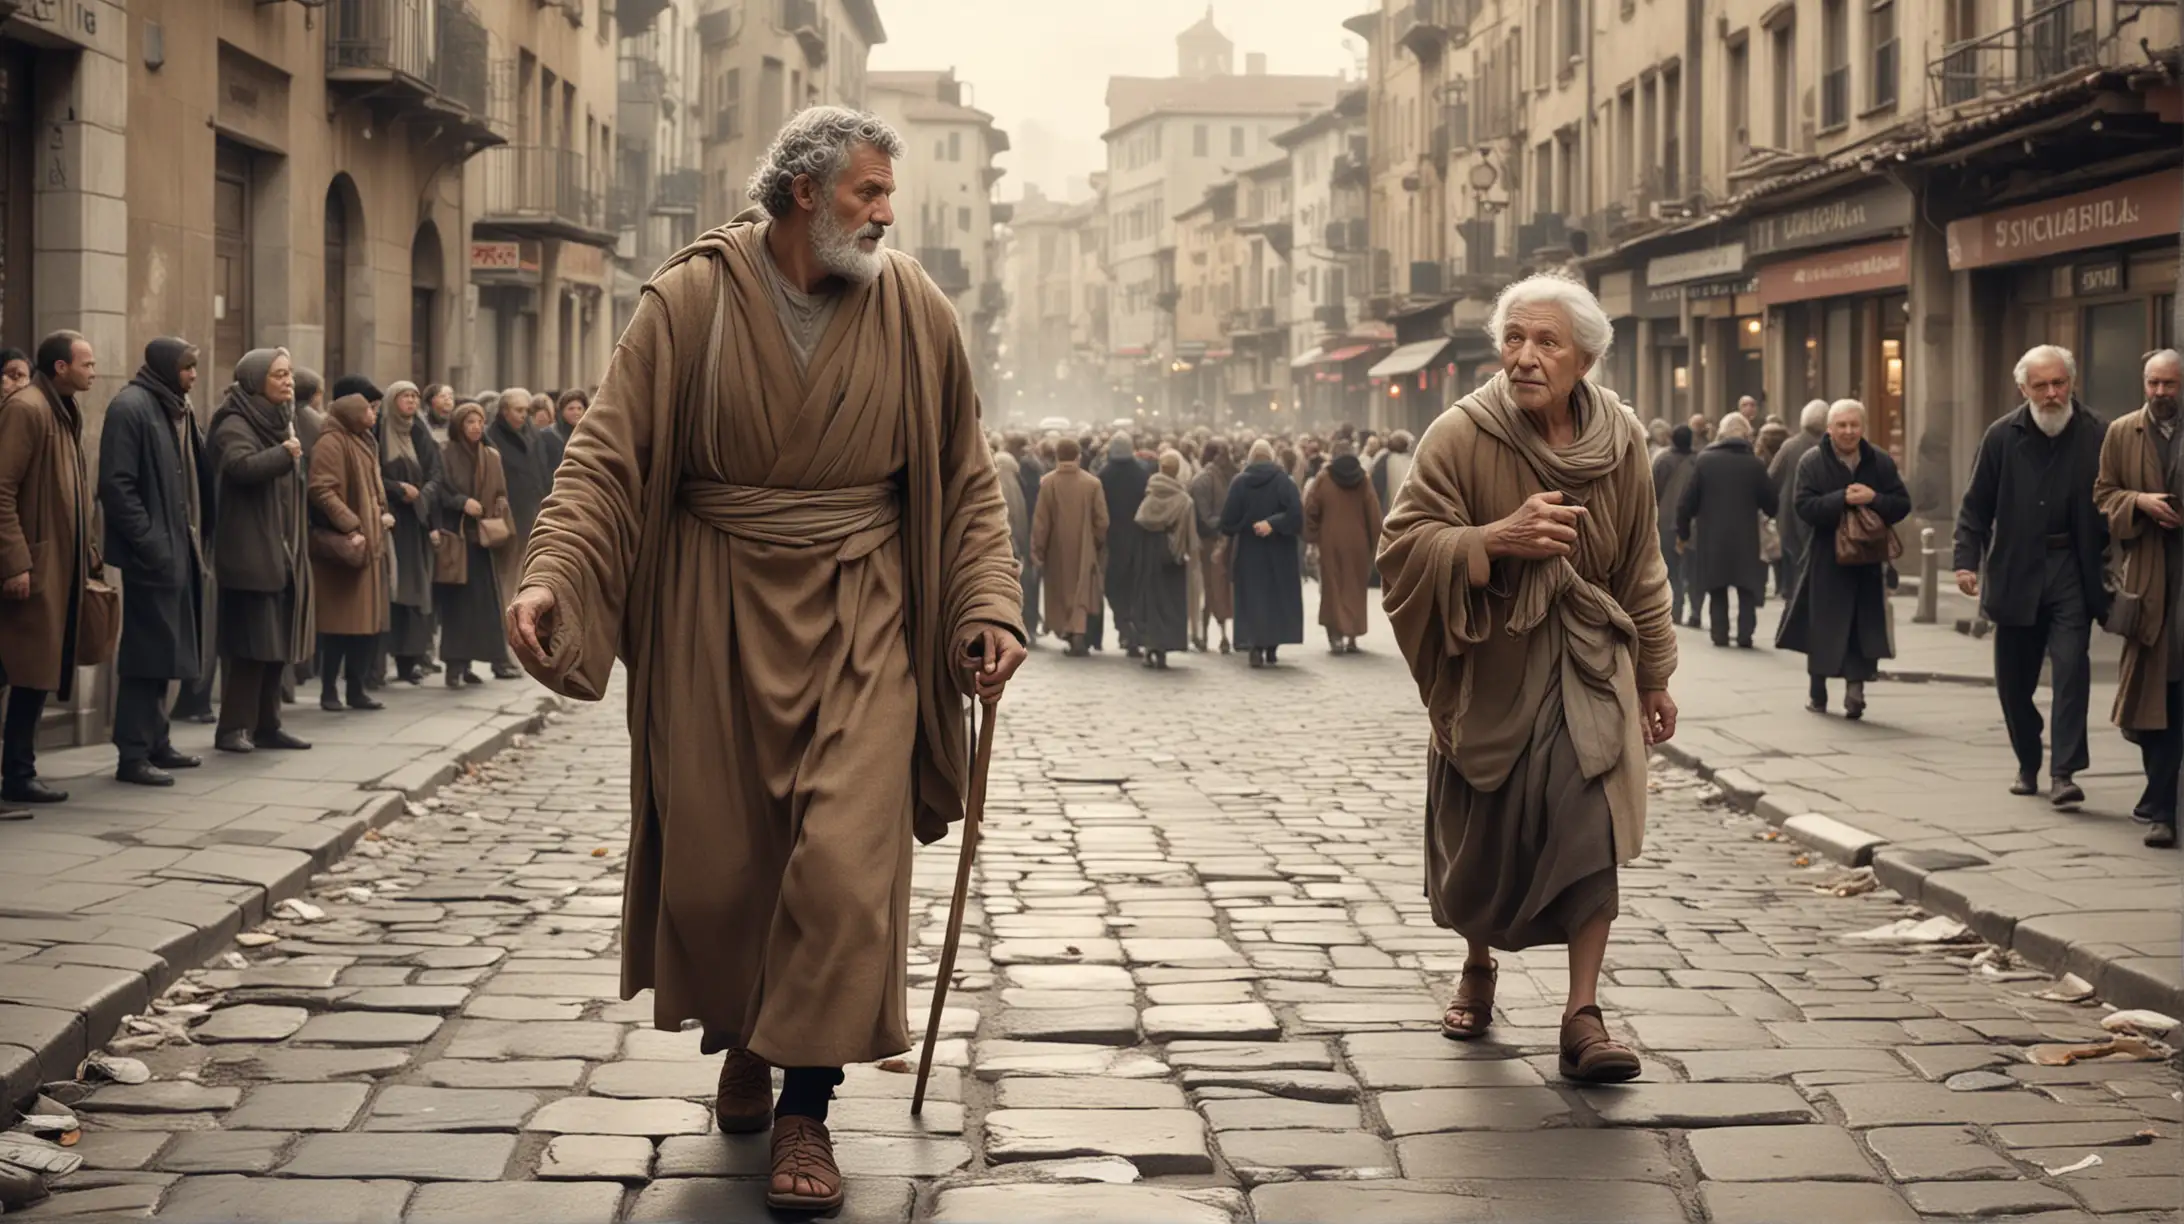 Generate Visuals of Stoic Virtues in Action:
 Illustrate stoic virtues in action with an image of a stoic philosopher helping an elderly person cross a bustling city street. The philosopher's strength and compassion are evident as they offer support to the frail individual, embodying the virtues of benevolence and kindness amidst the chaos of urban life.